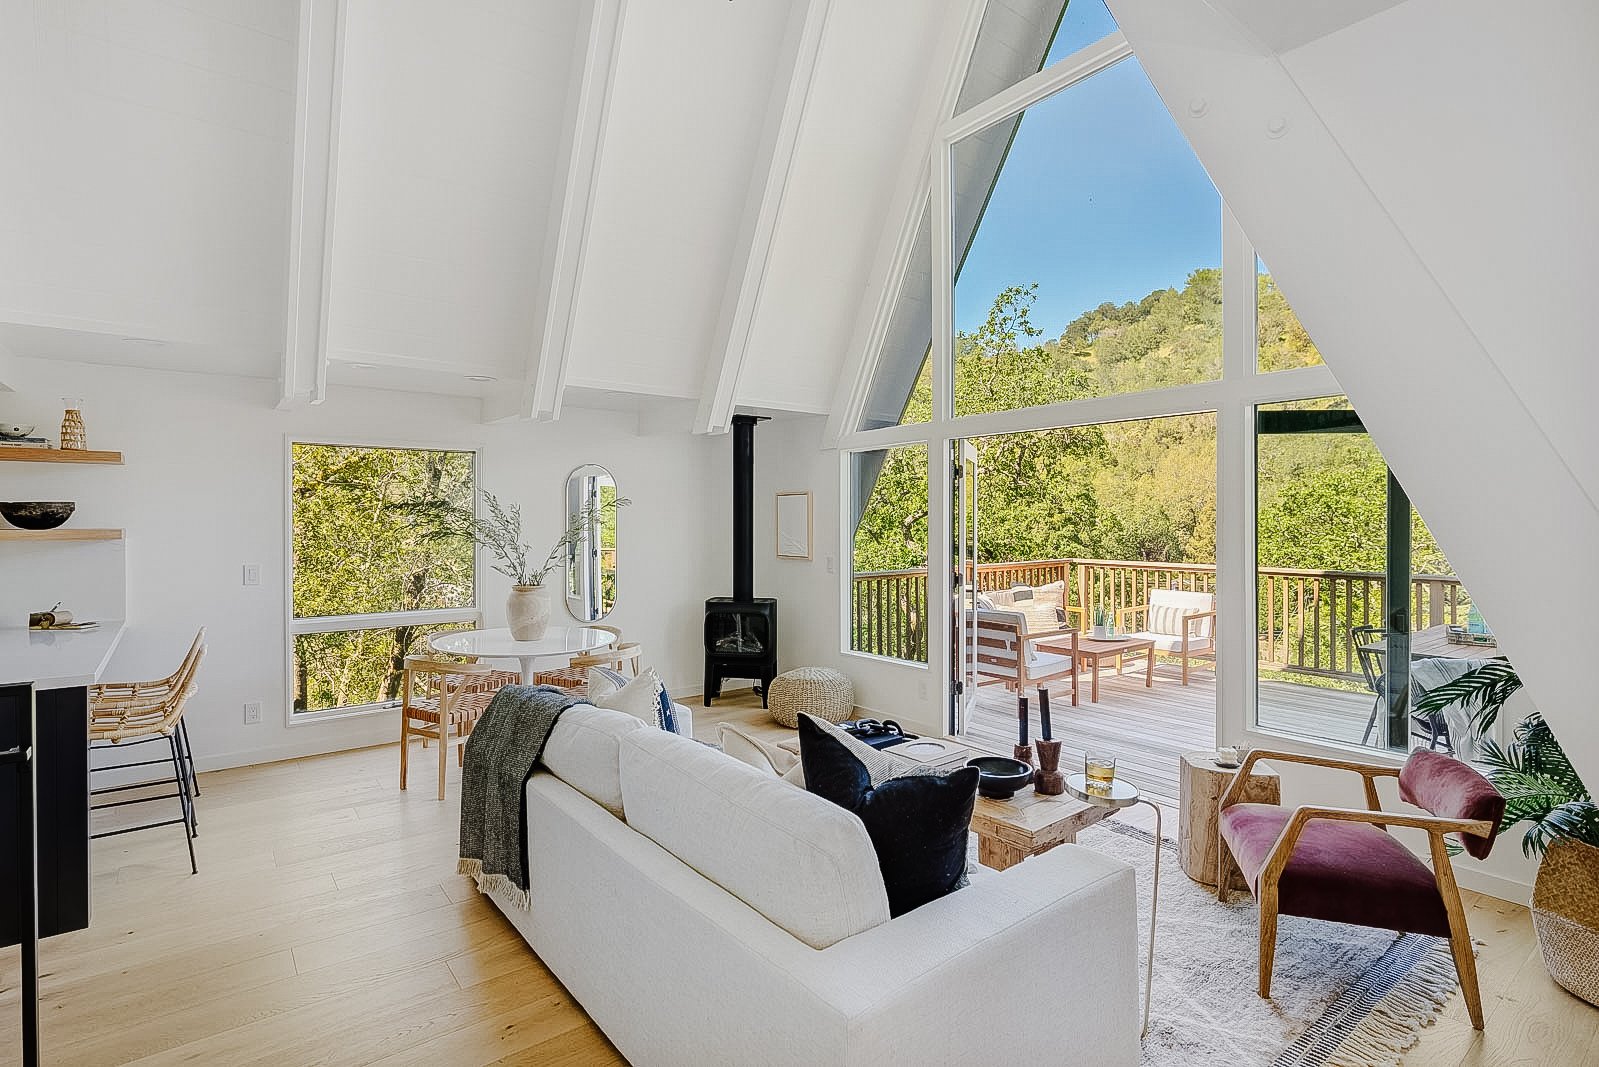 28 Piper Lane Fairfax Real Estate _ Listed by Whitney Potter at Own Marin -13.jpg